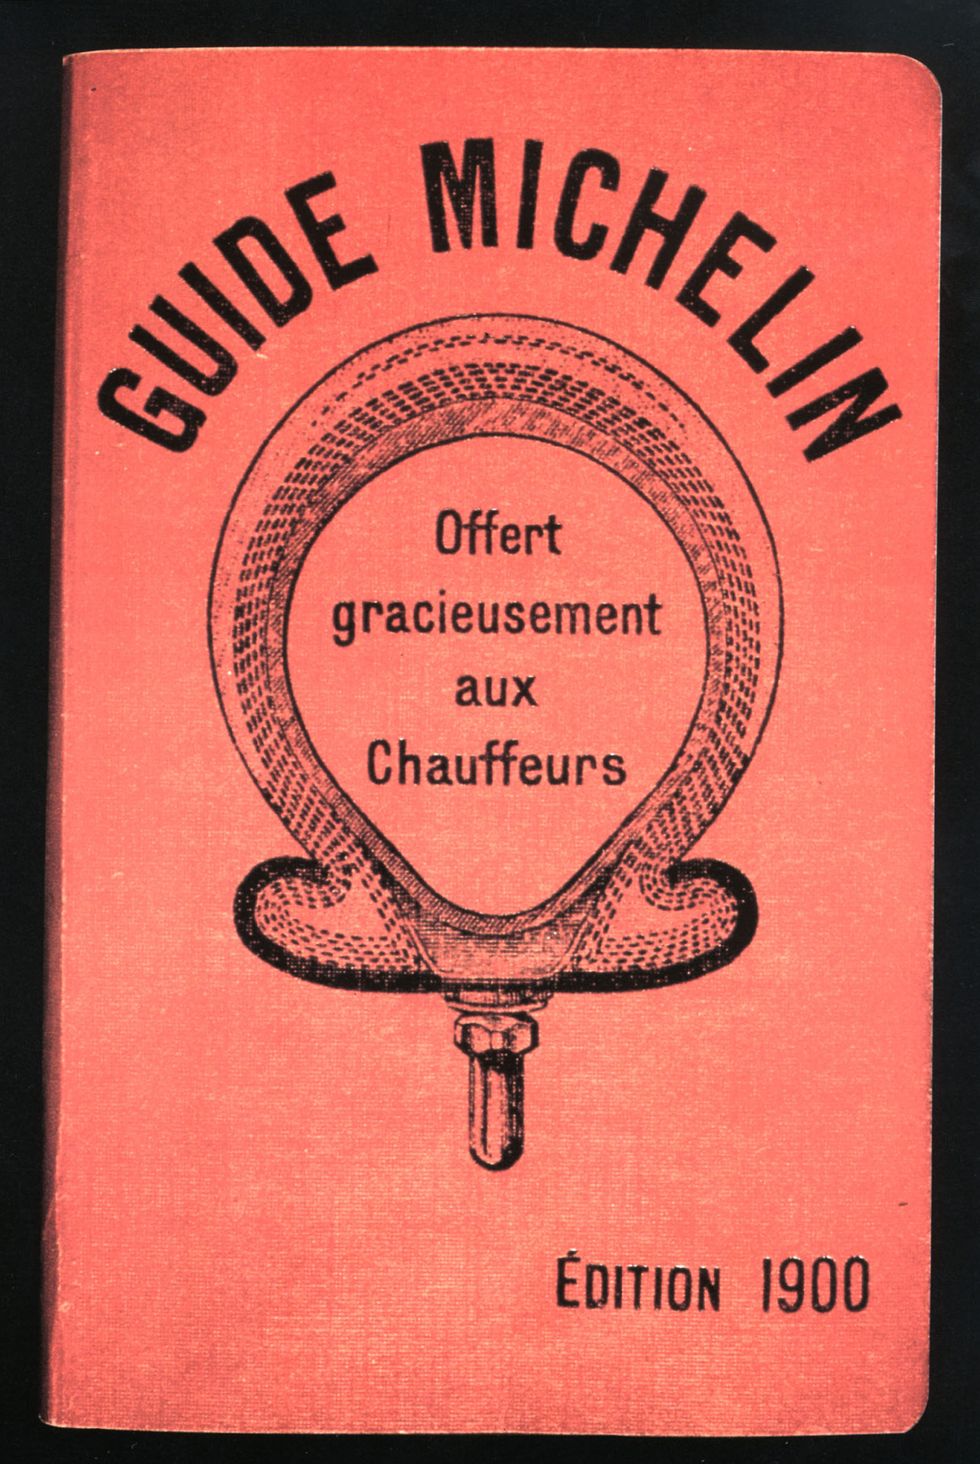 michelin guide given to drivers, 1900